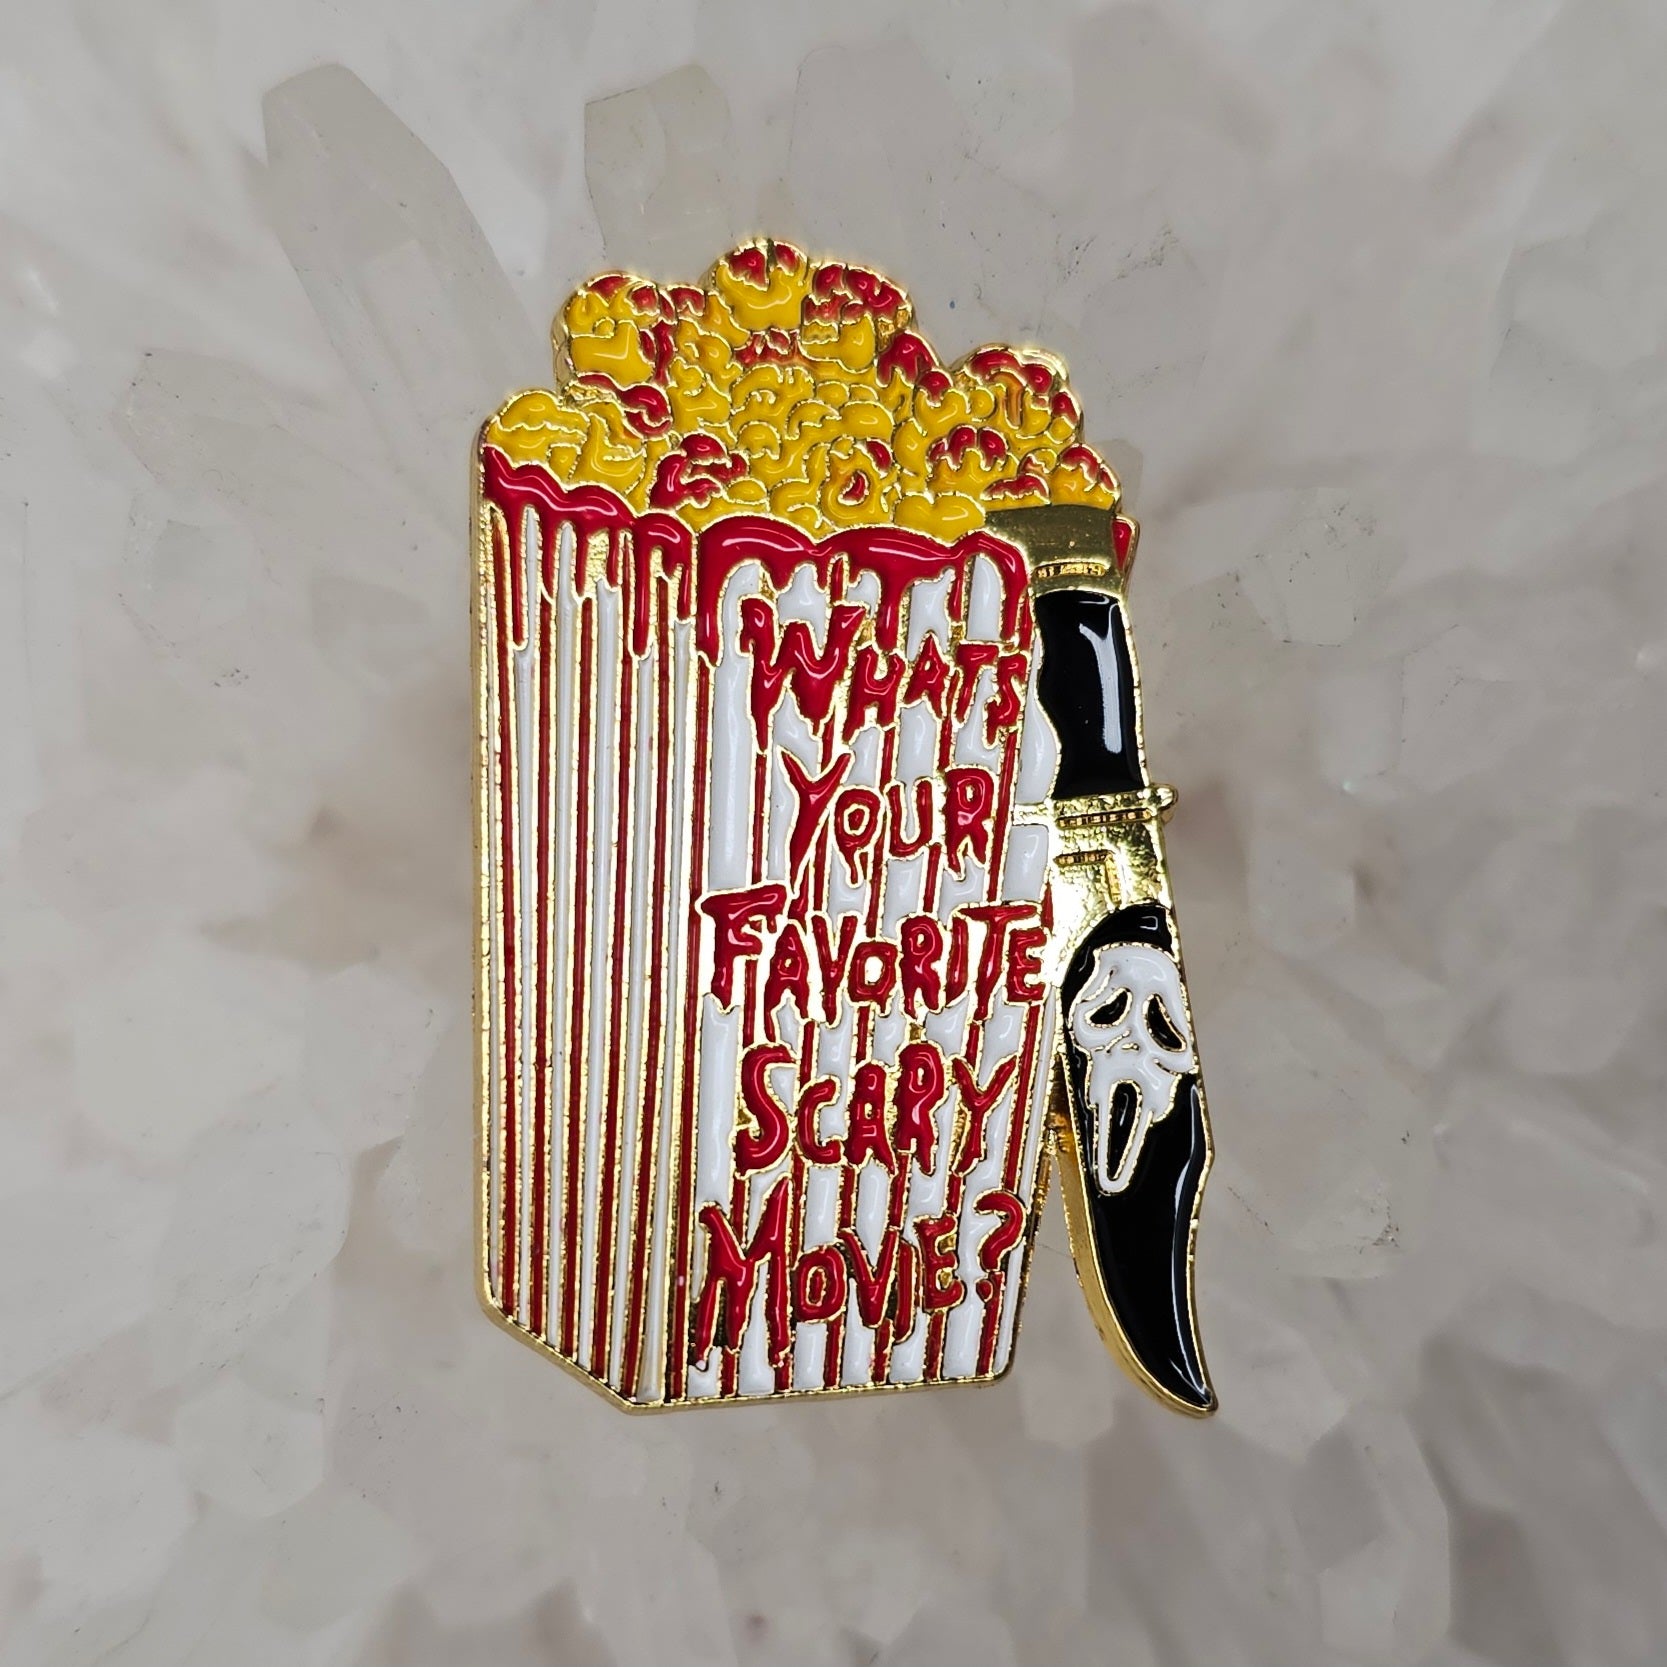 Whats Your Favorite Scary Movie Popcorn Scream Gore Slasher Enamel Pins Hat Pins Lapel Pin Brooch Badge Festival Pin